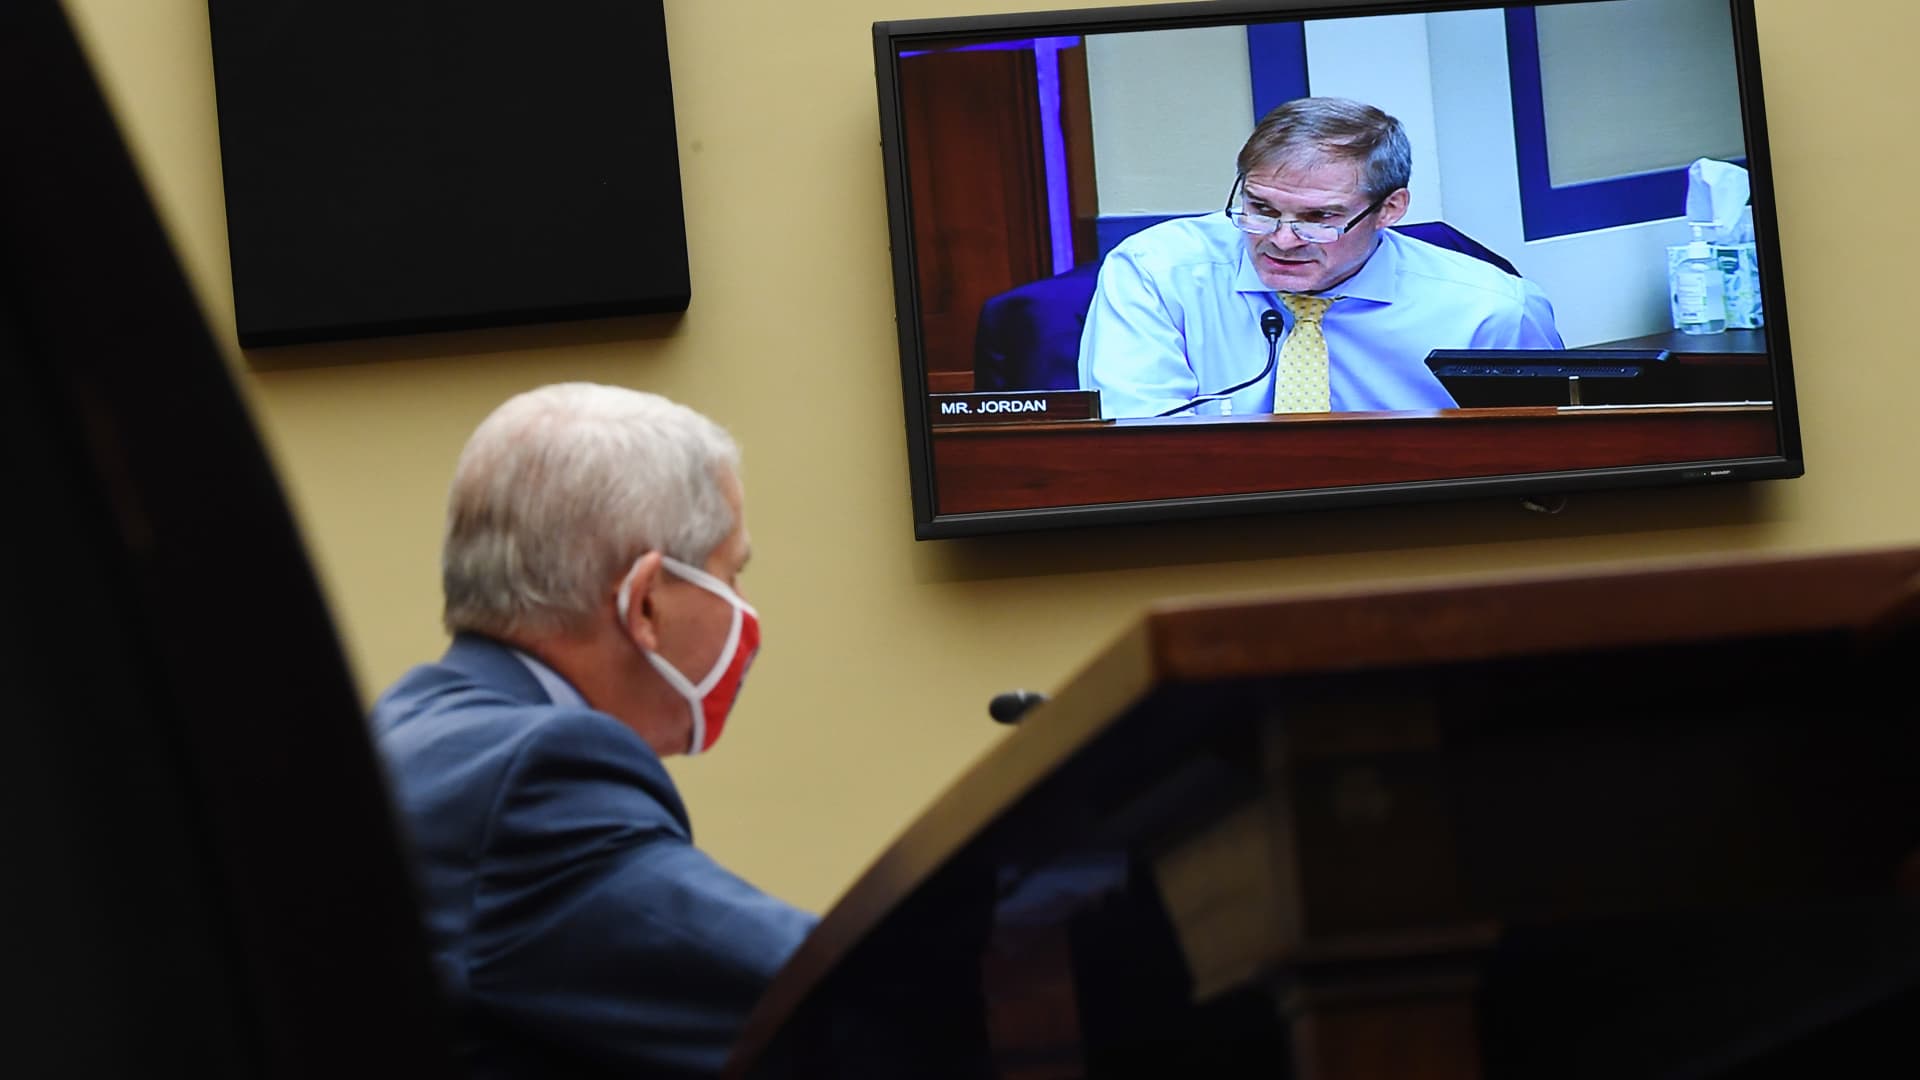 Dr. Anthony Fauci, director of the National Institute for Allergy and Infectious Diseases, listens as Rep. Jim Jordan, R-Ohio, is seen speaking on a monitor at a House Subcommittee on the Coronavirus Crisis hearing on July 31, 2020 in Washington, DC.